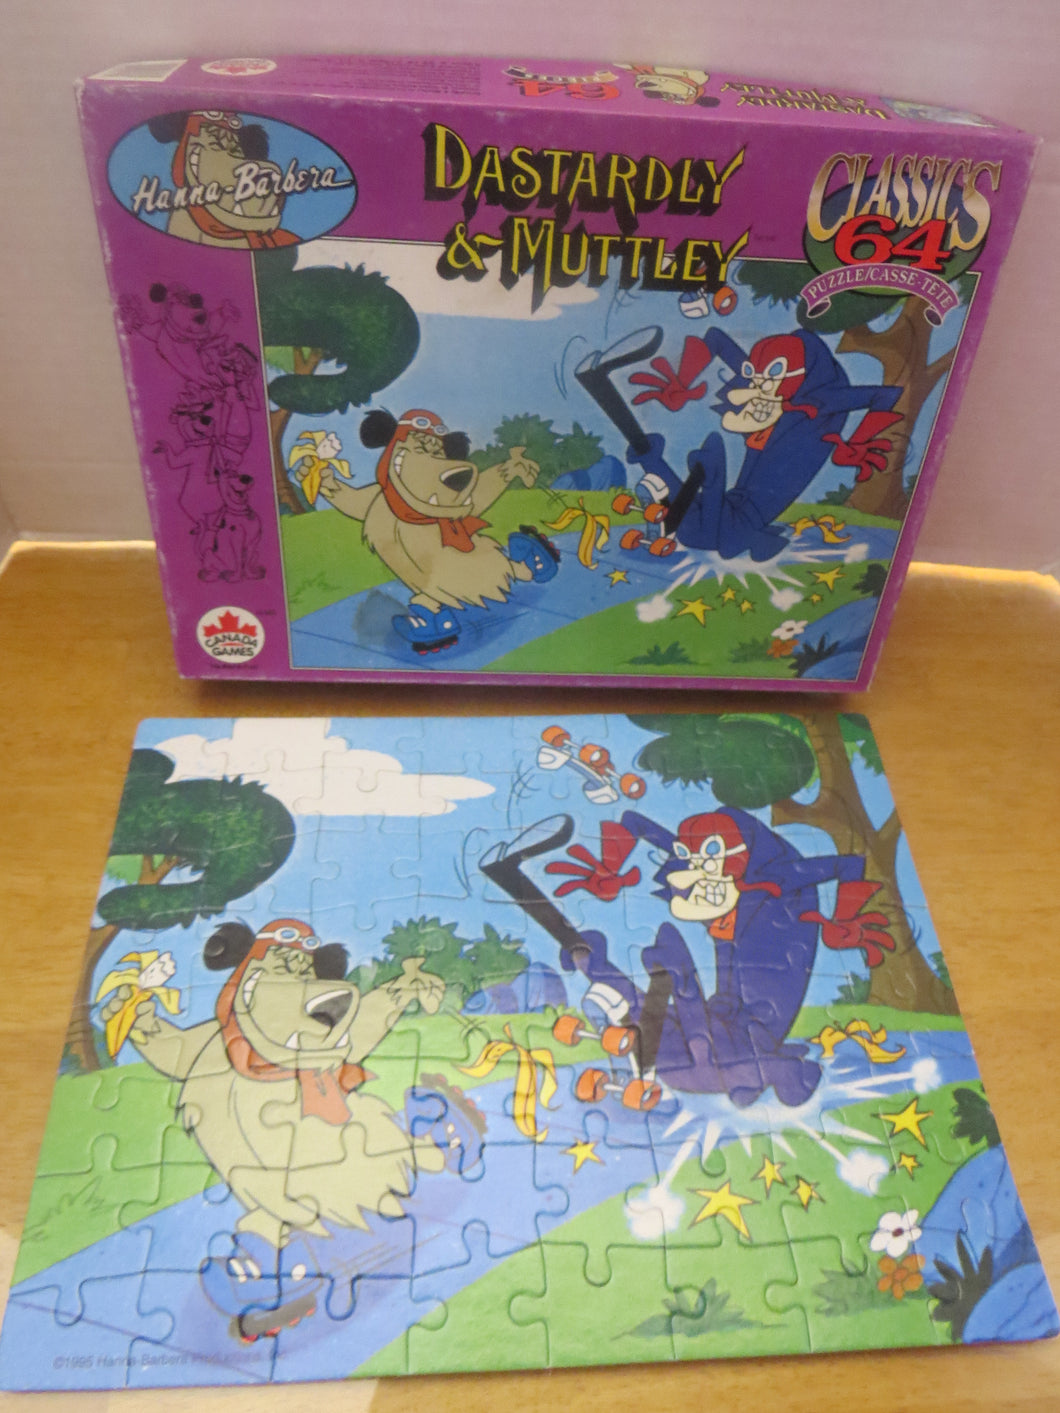 Hanna-Barbera Puzzle - DASTARDLY & MUTTLEY 64 pieces - complete w box